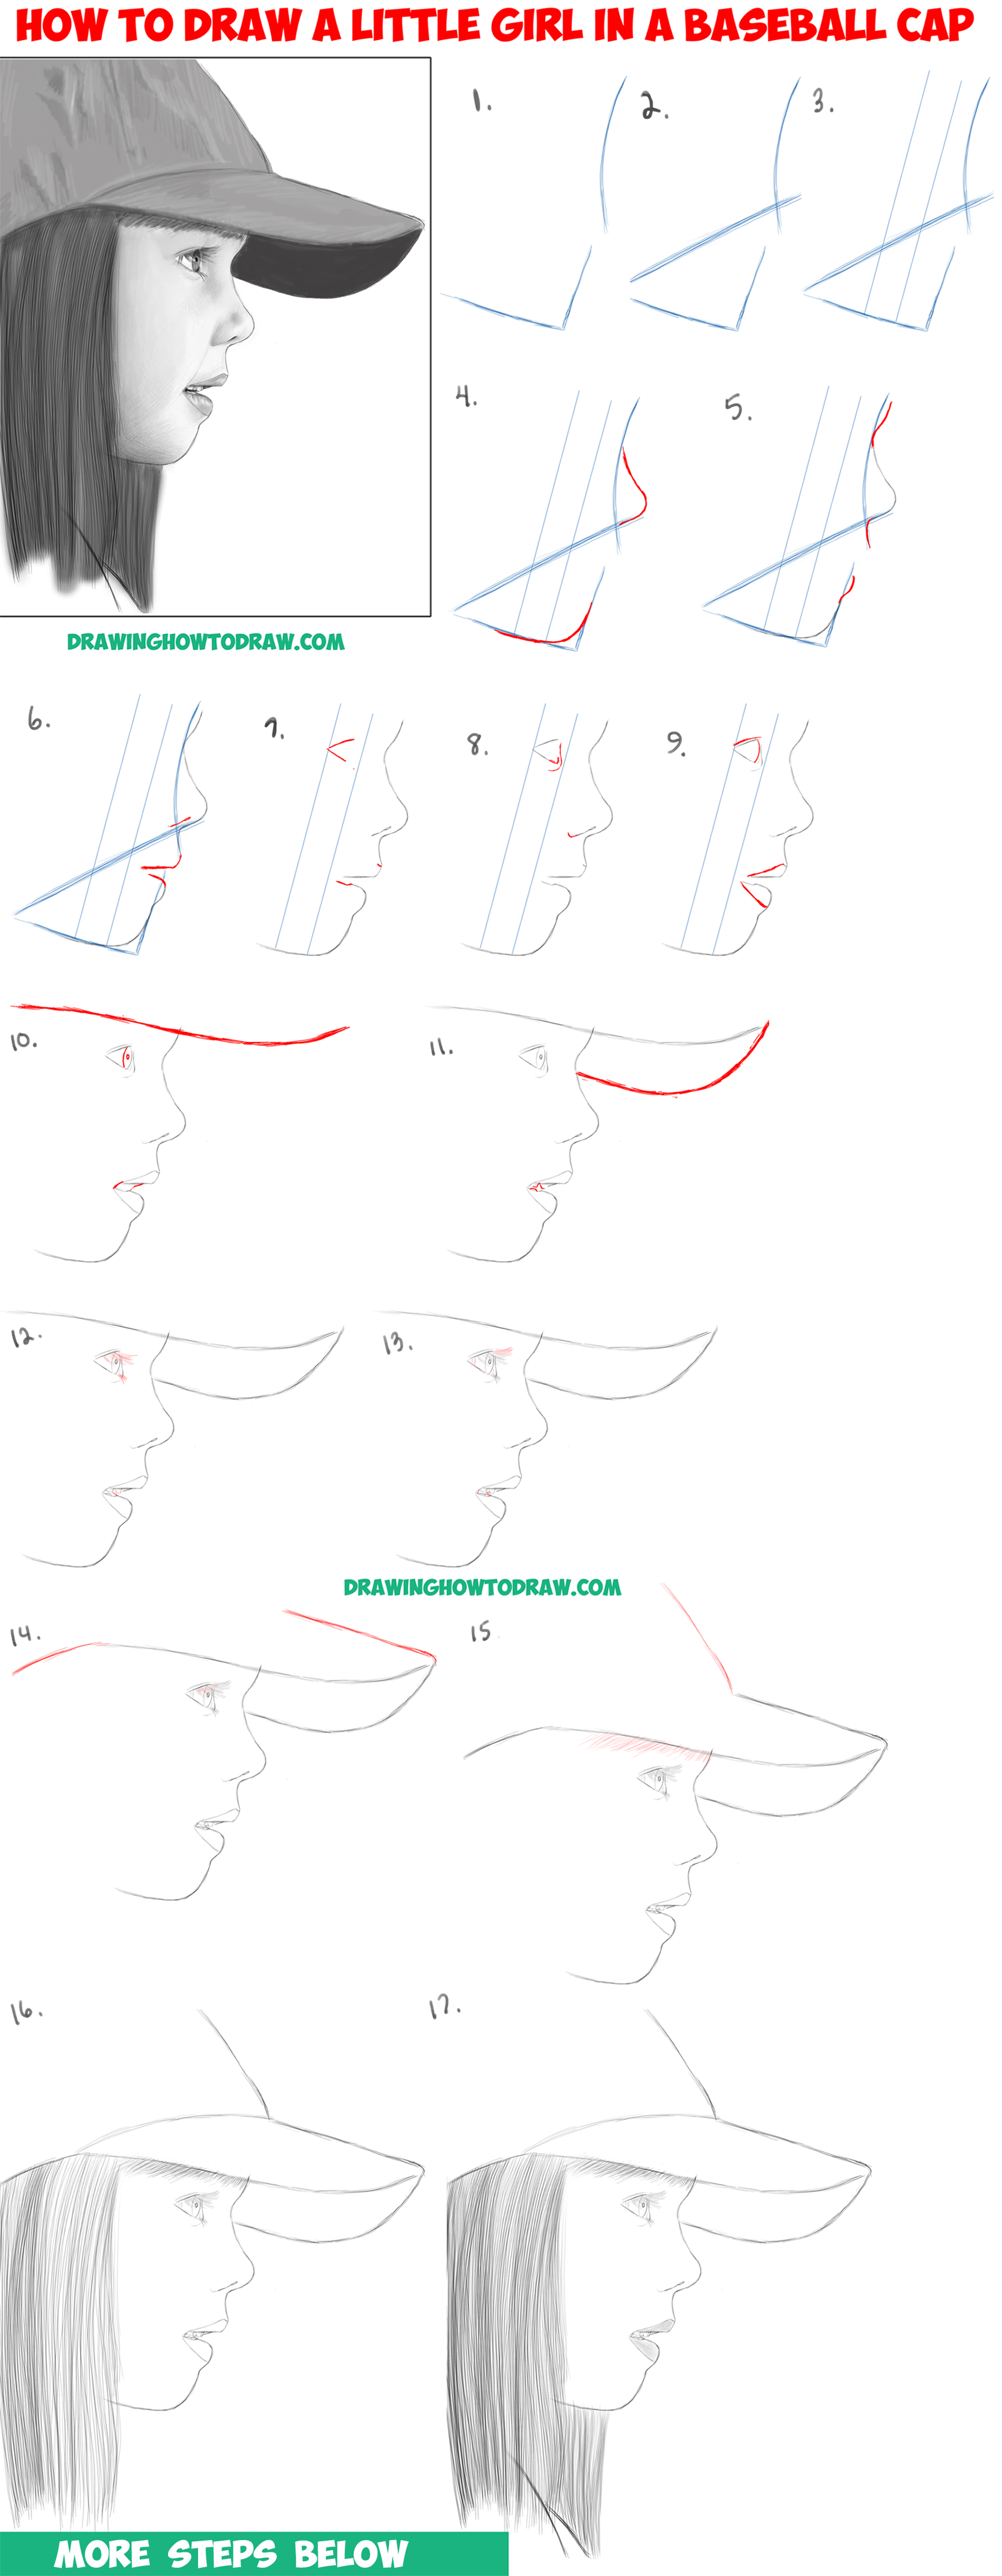 How To Draw A Realistic Cute Little Girl S Face Head From The Side Profile View Step By Step Drawing Tutorial For Beginners How To Draw Step By Step Drawing Tutorials